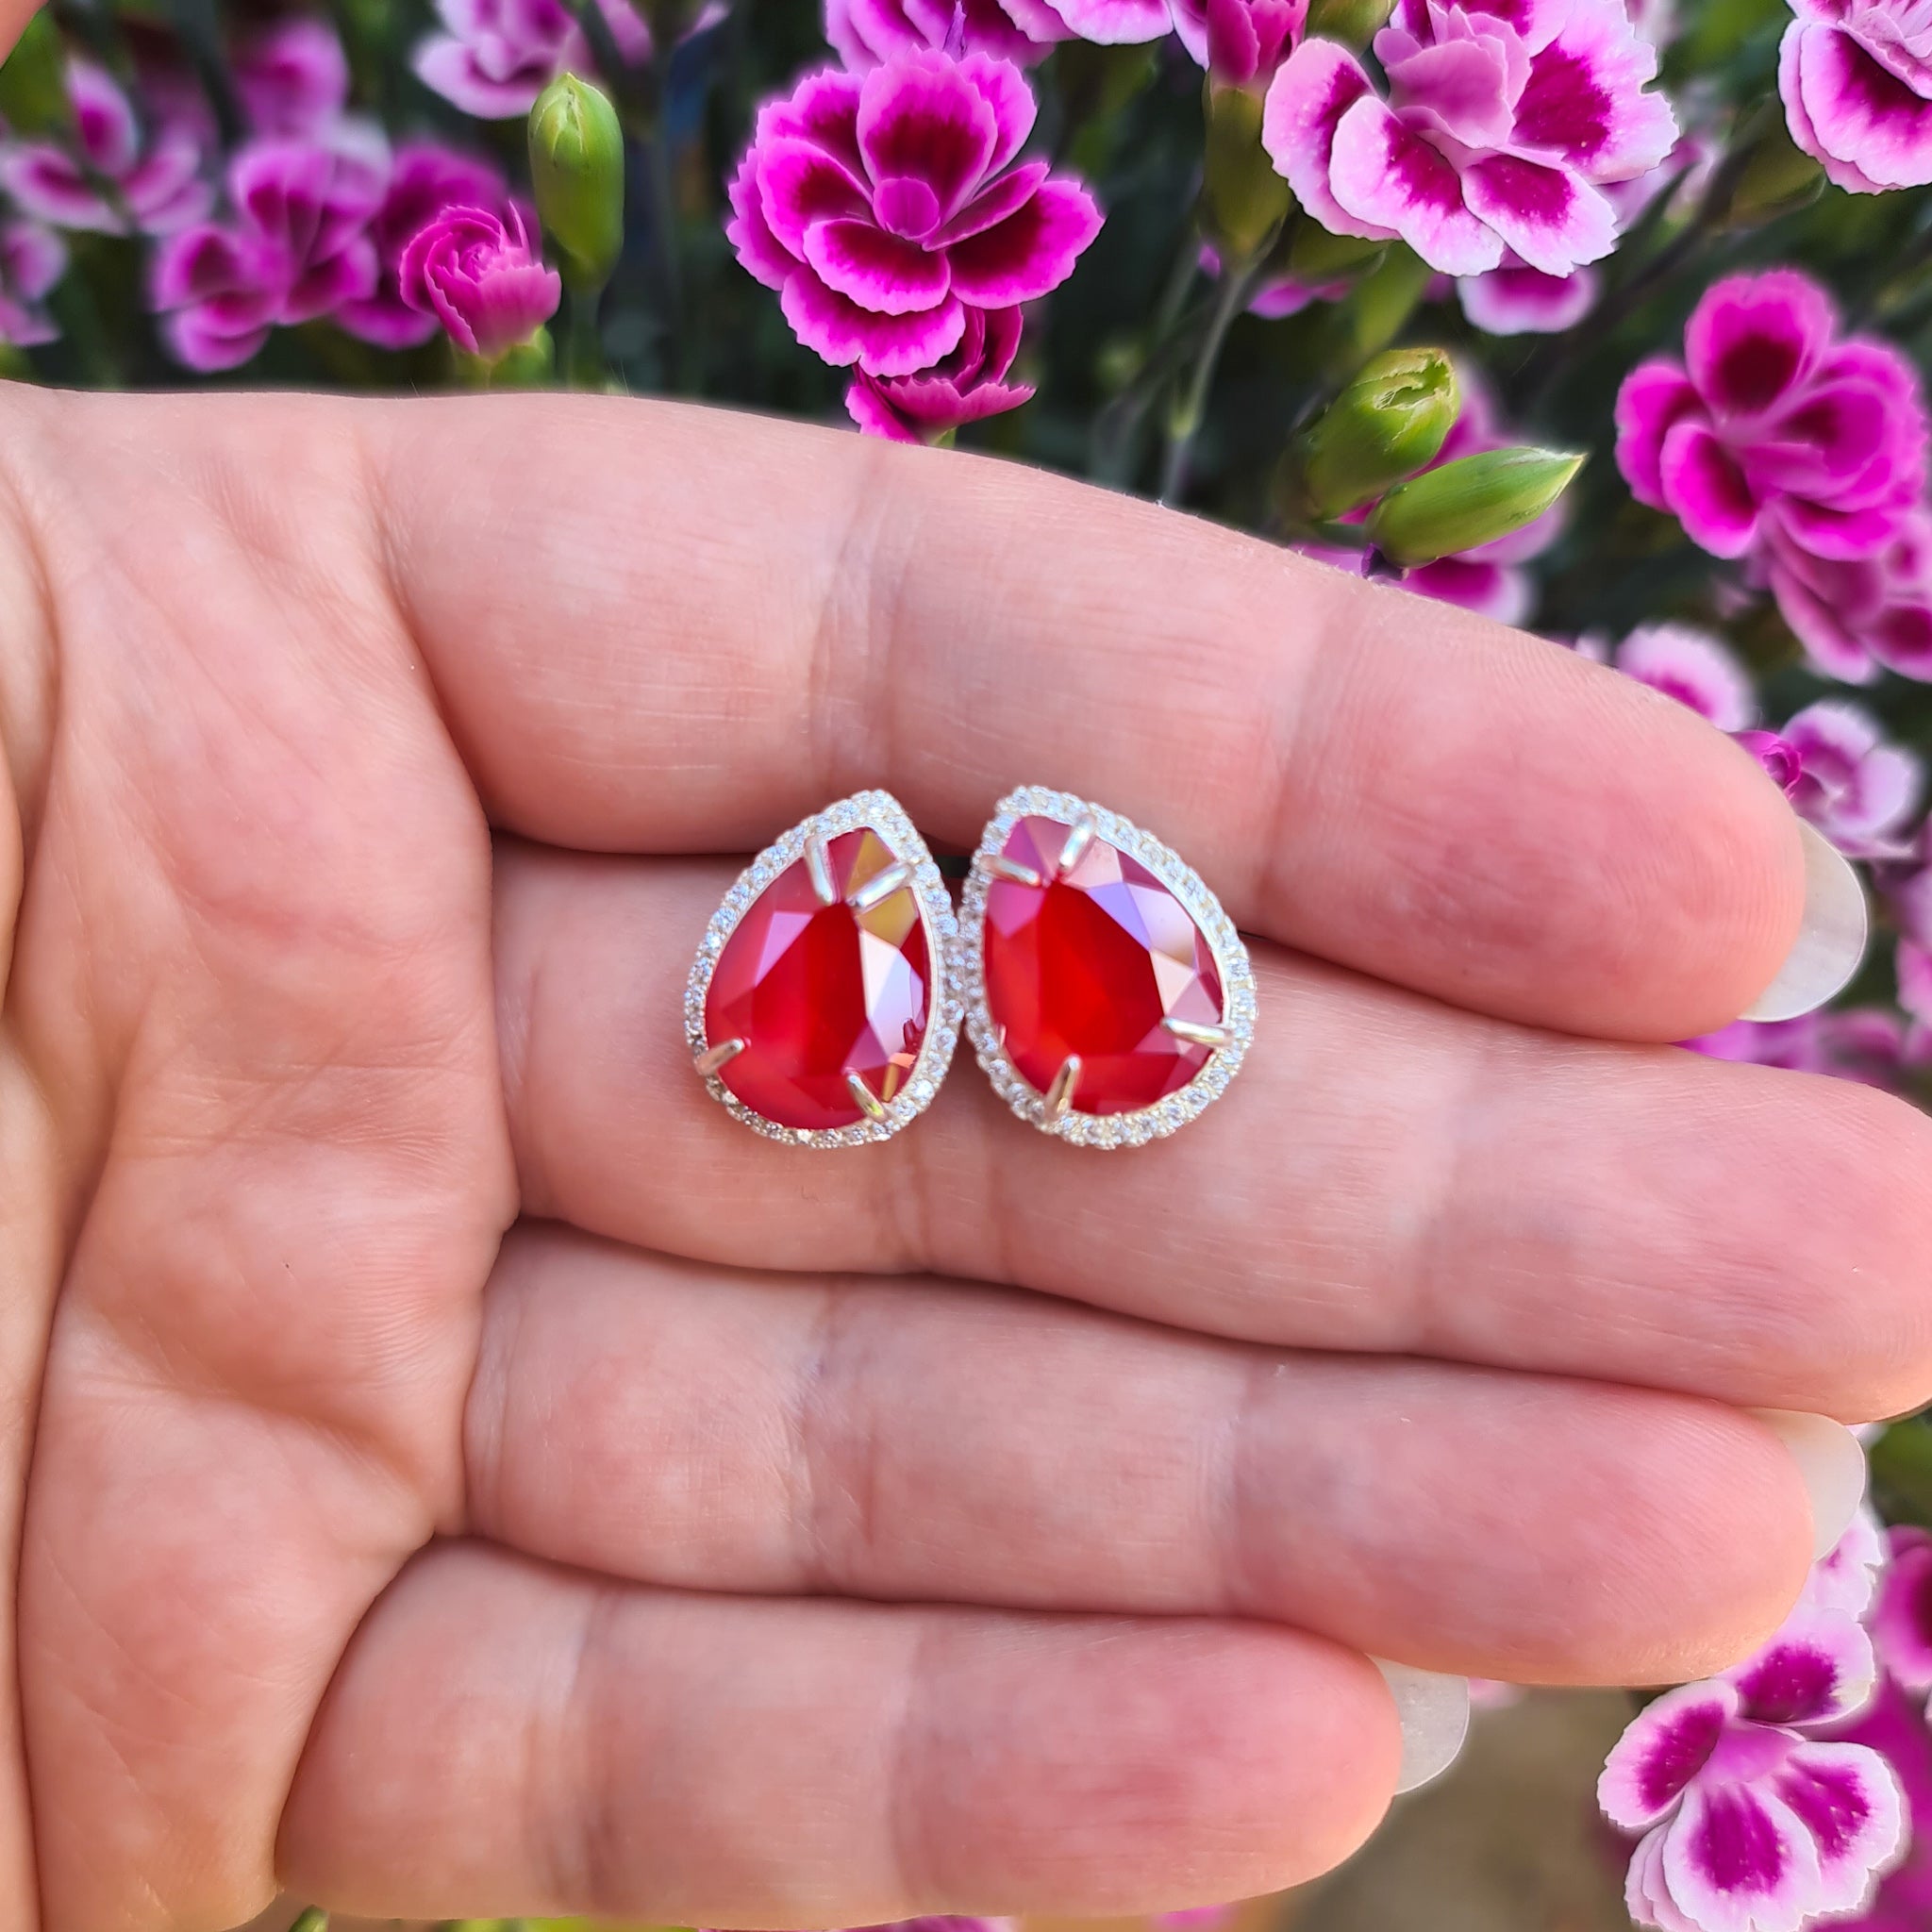 Dazzling Pear Stud Earrings in Sterling Silver with Large Royal Red Crystal Stone